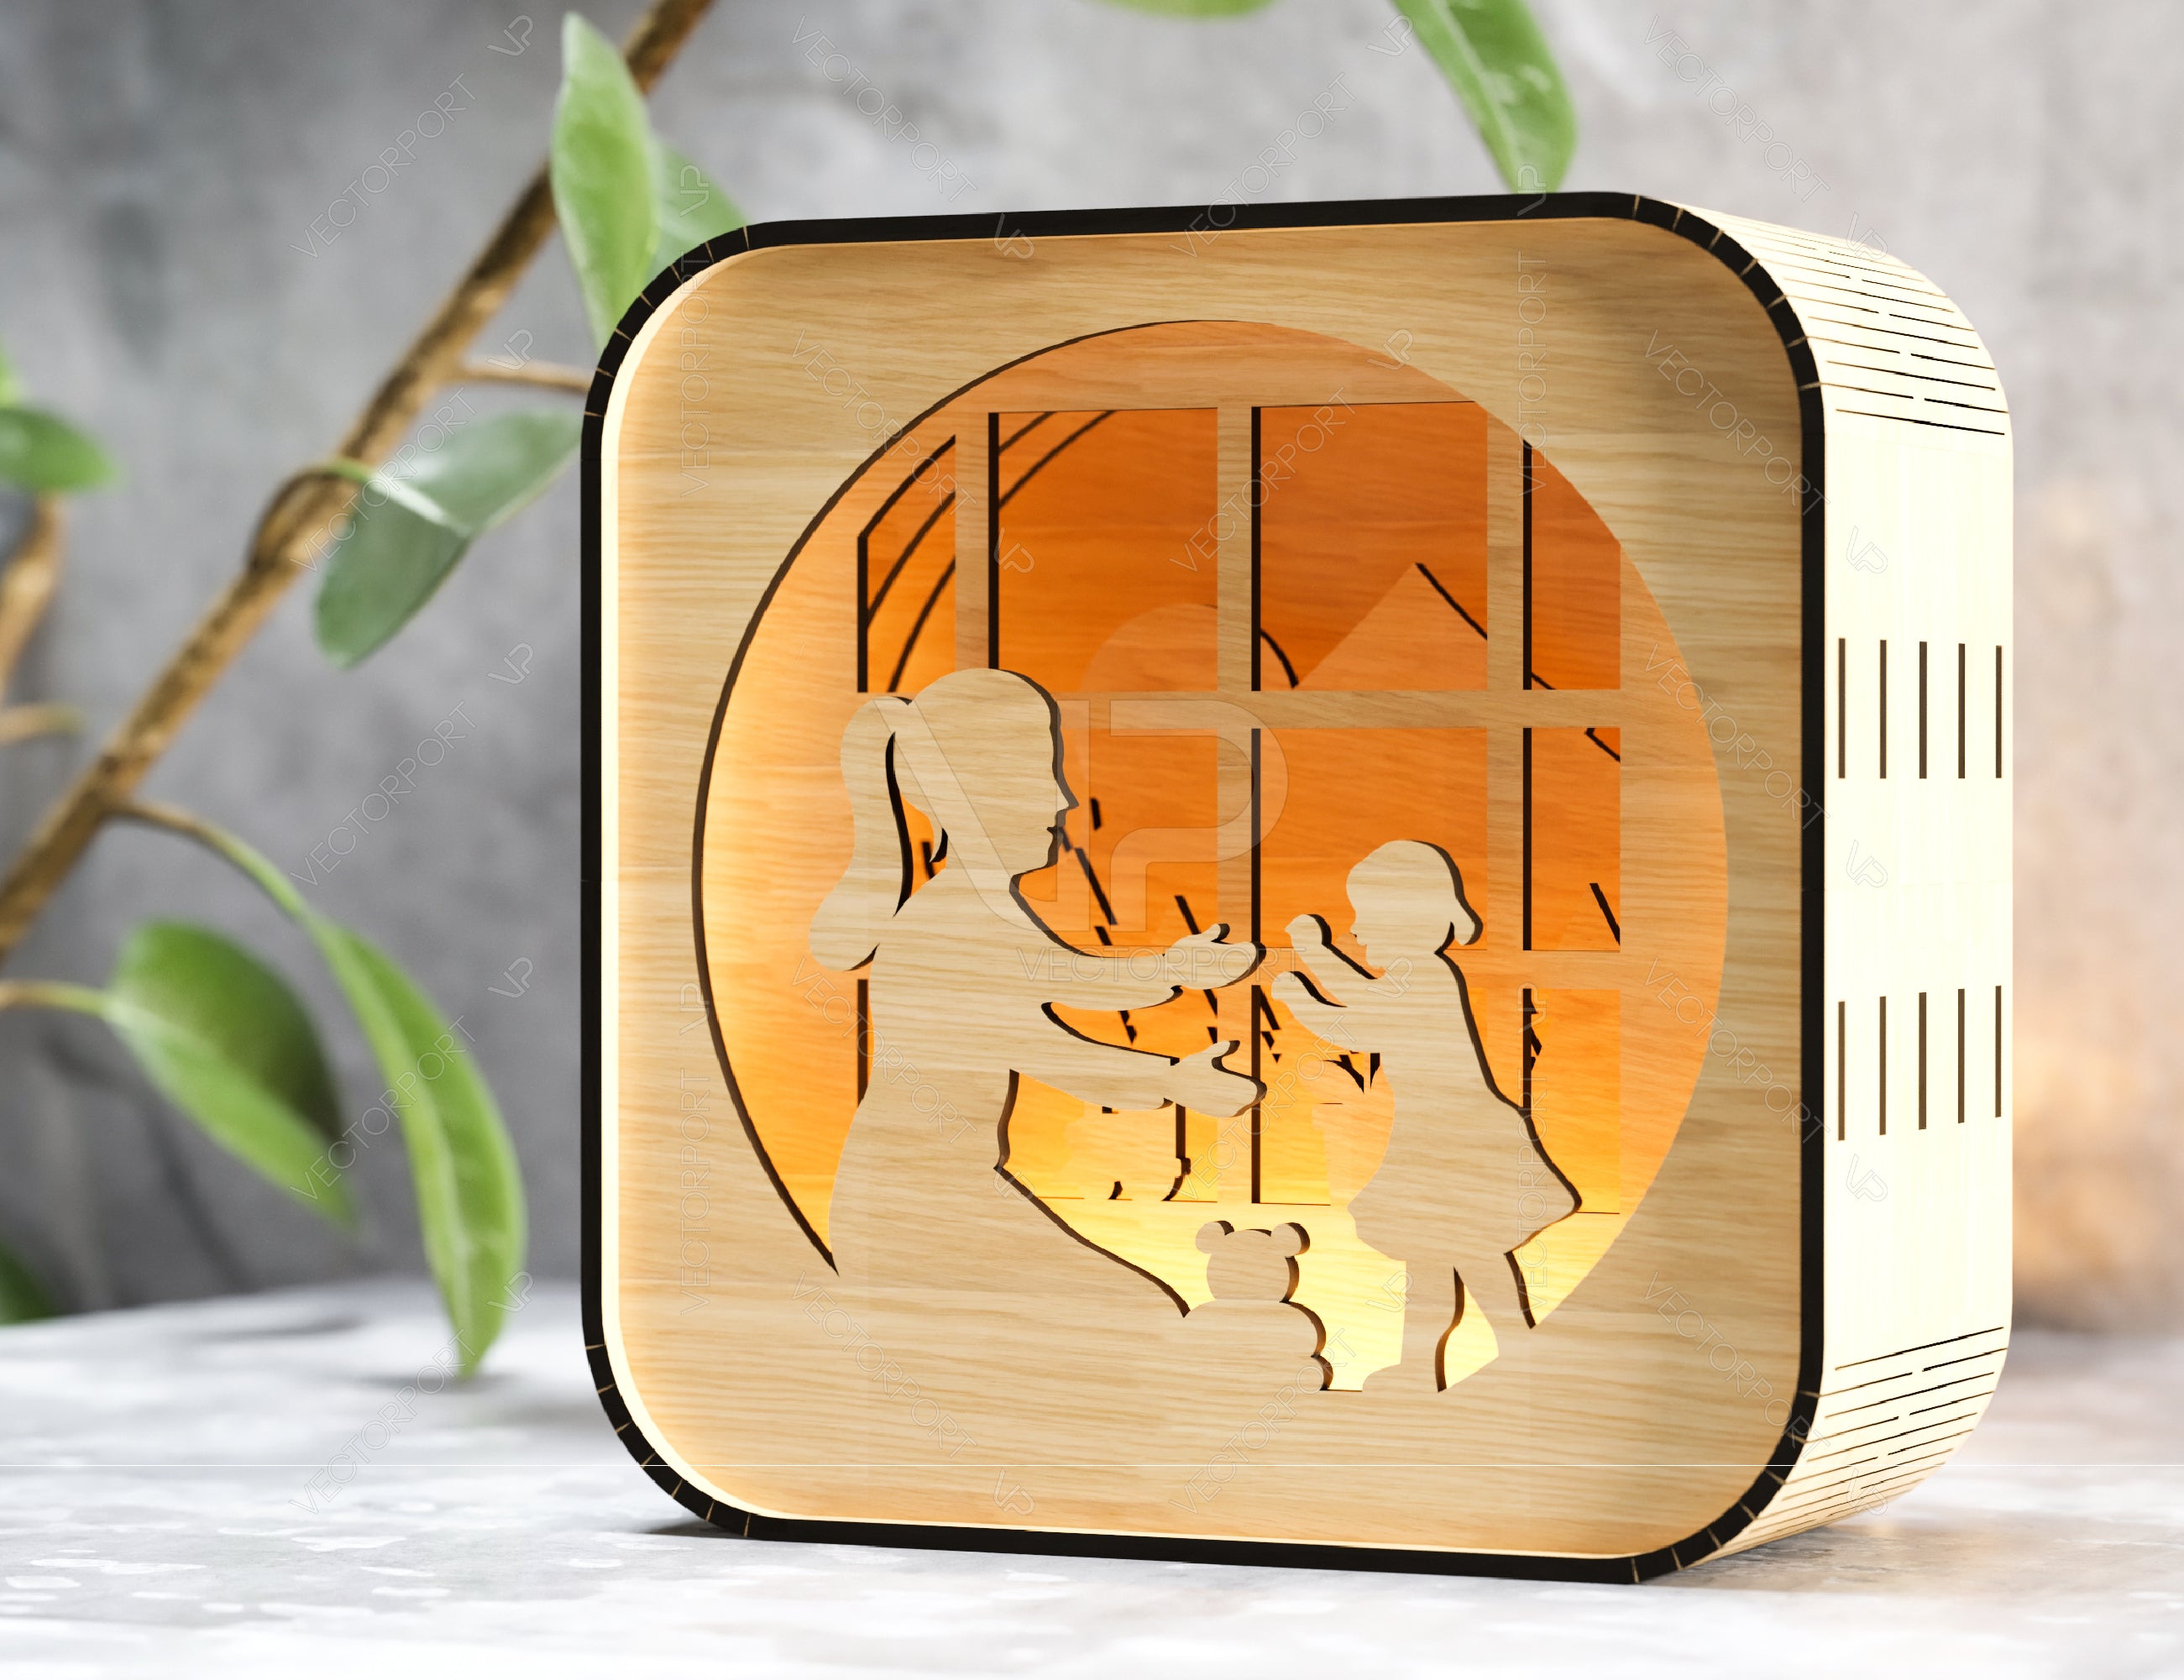 Mother’s Day Gift Wooden Led Night Lamp Mom & Daughter Scene Multilayer Shadowbox Laser Cut Lampshade Table Lamp Digital Download |#U219|